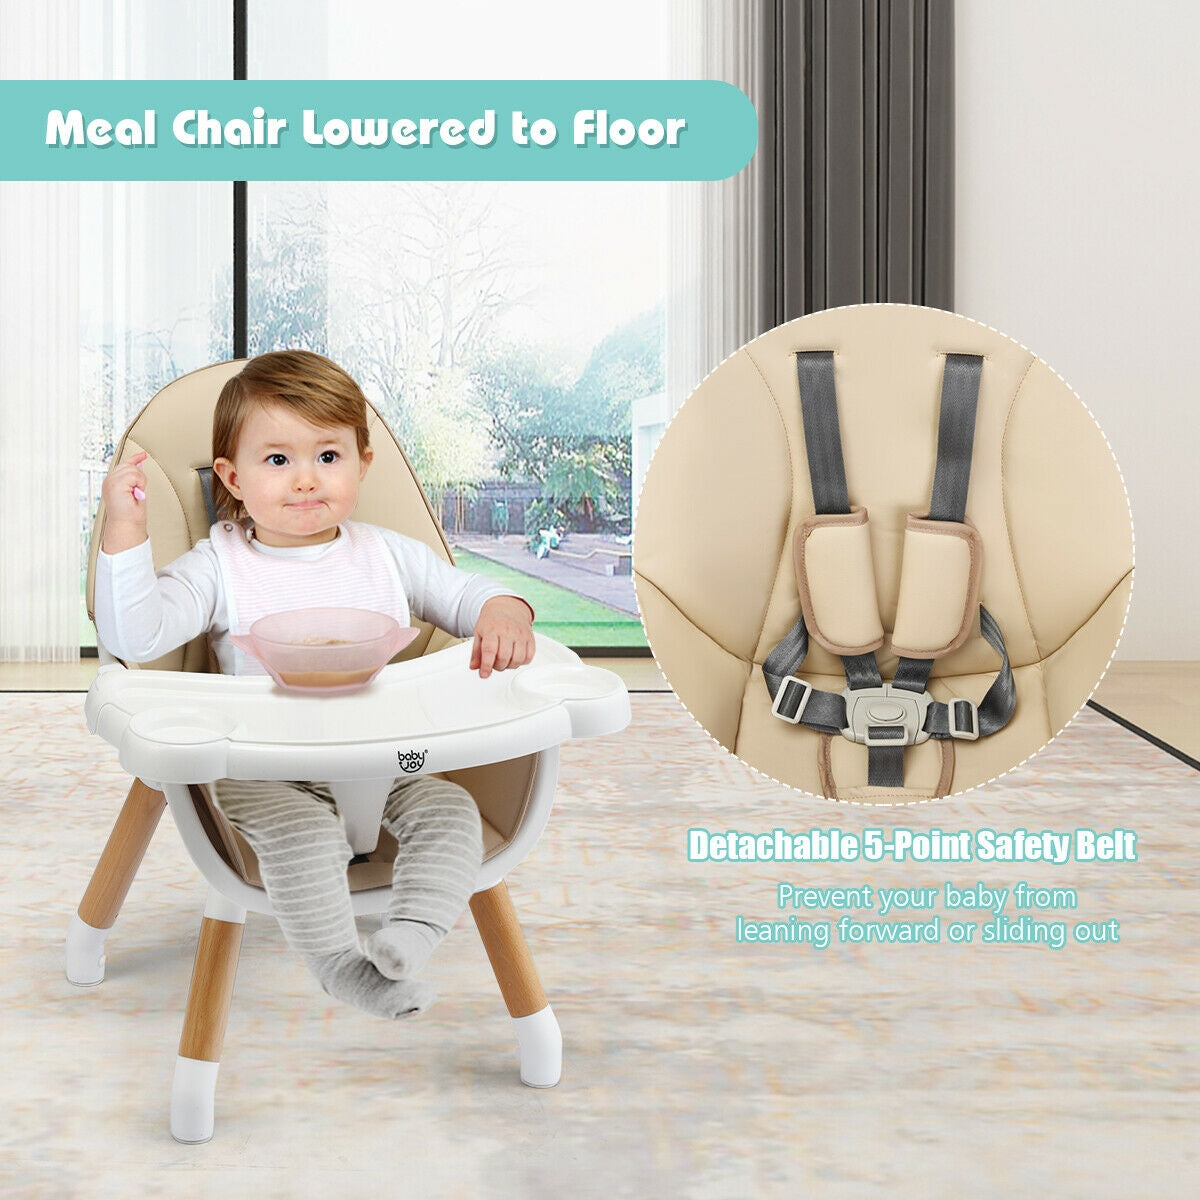 5-in-1 Baby Wooden Convertible High Chair -Khaki